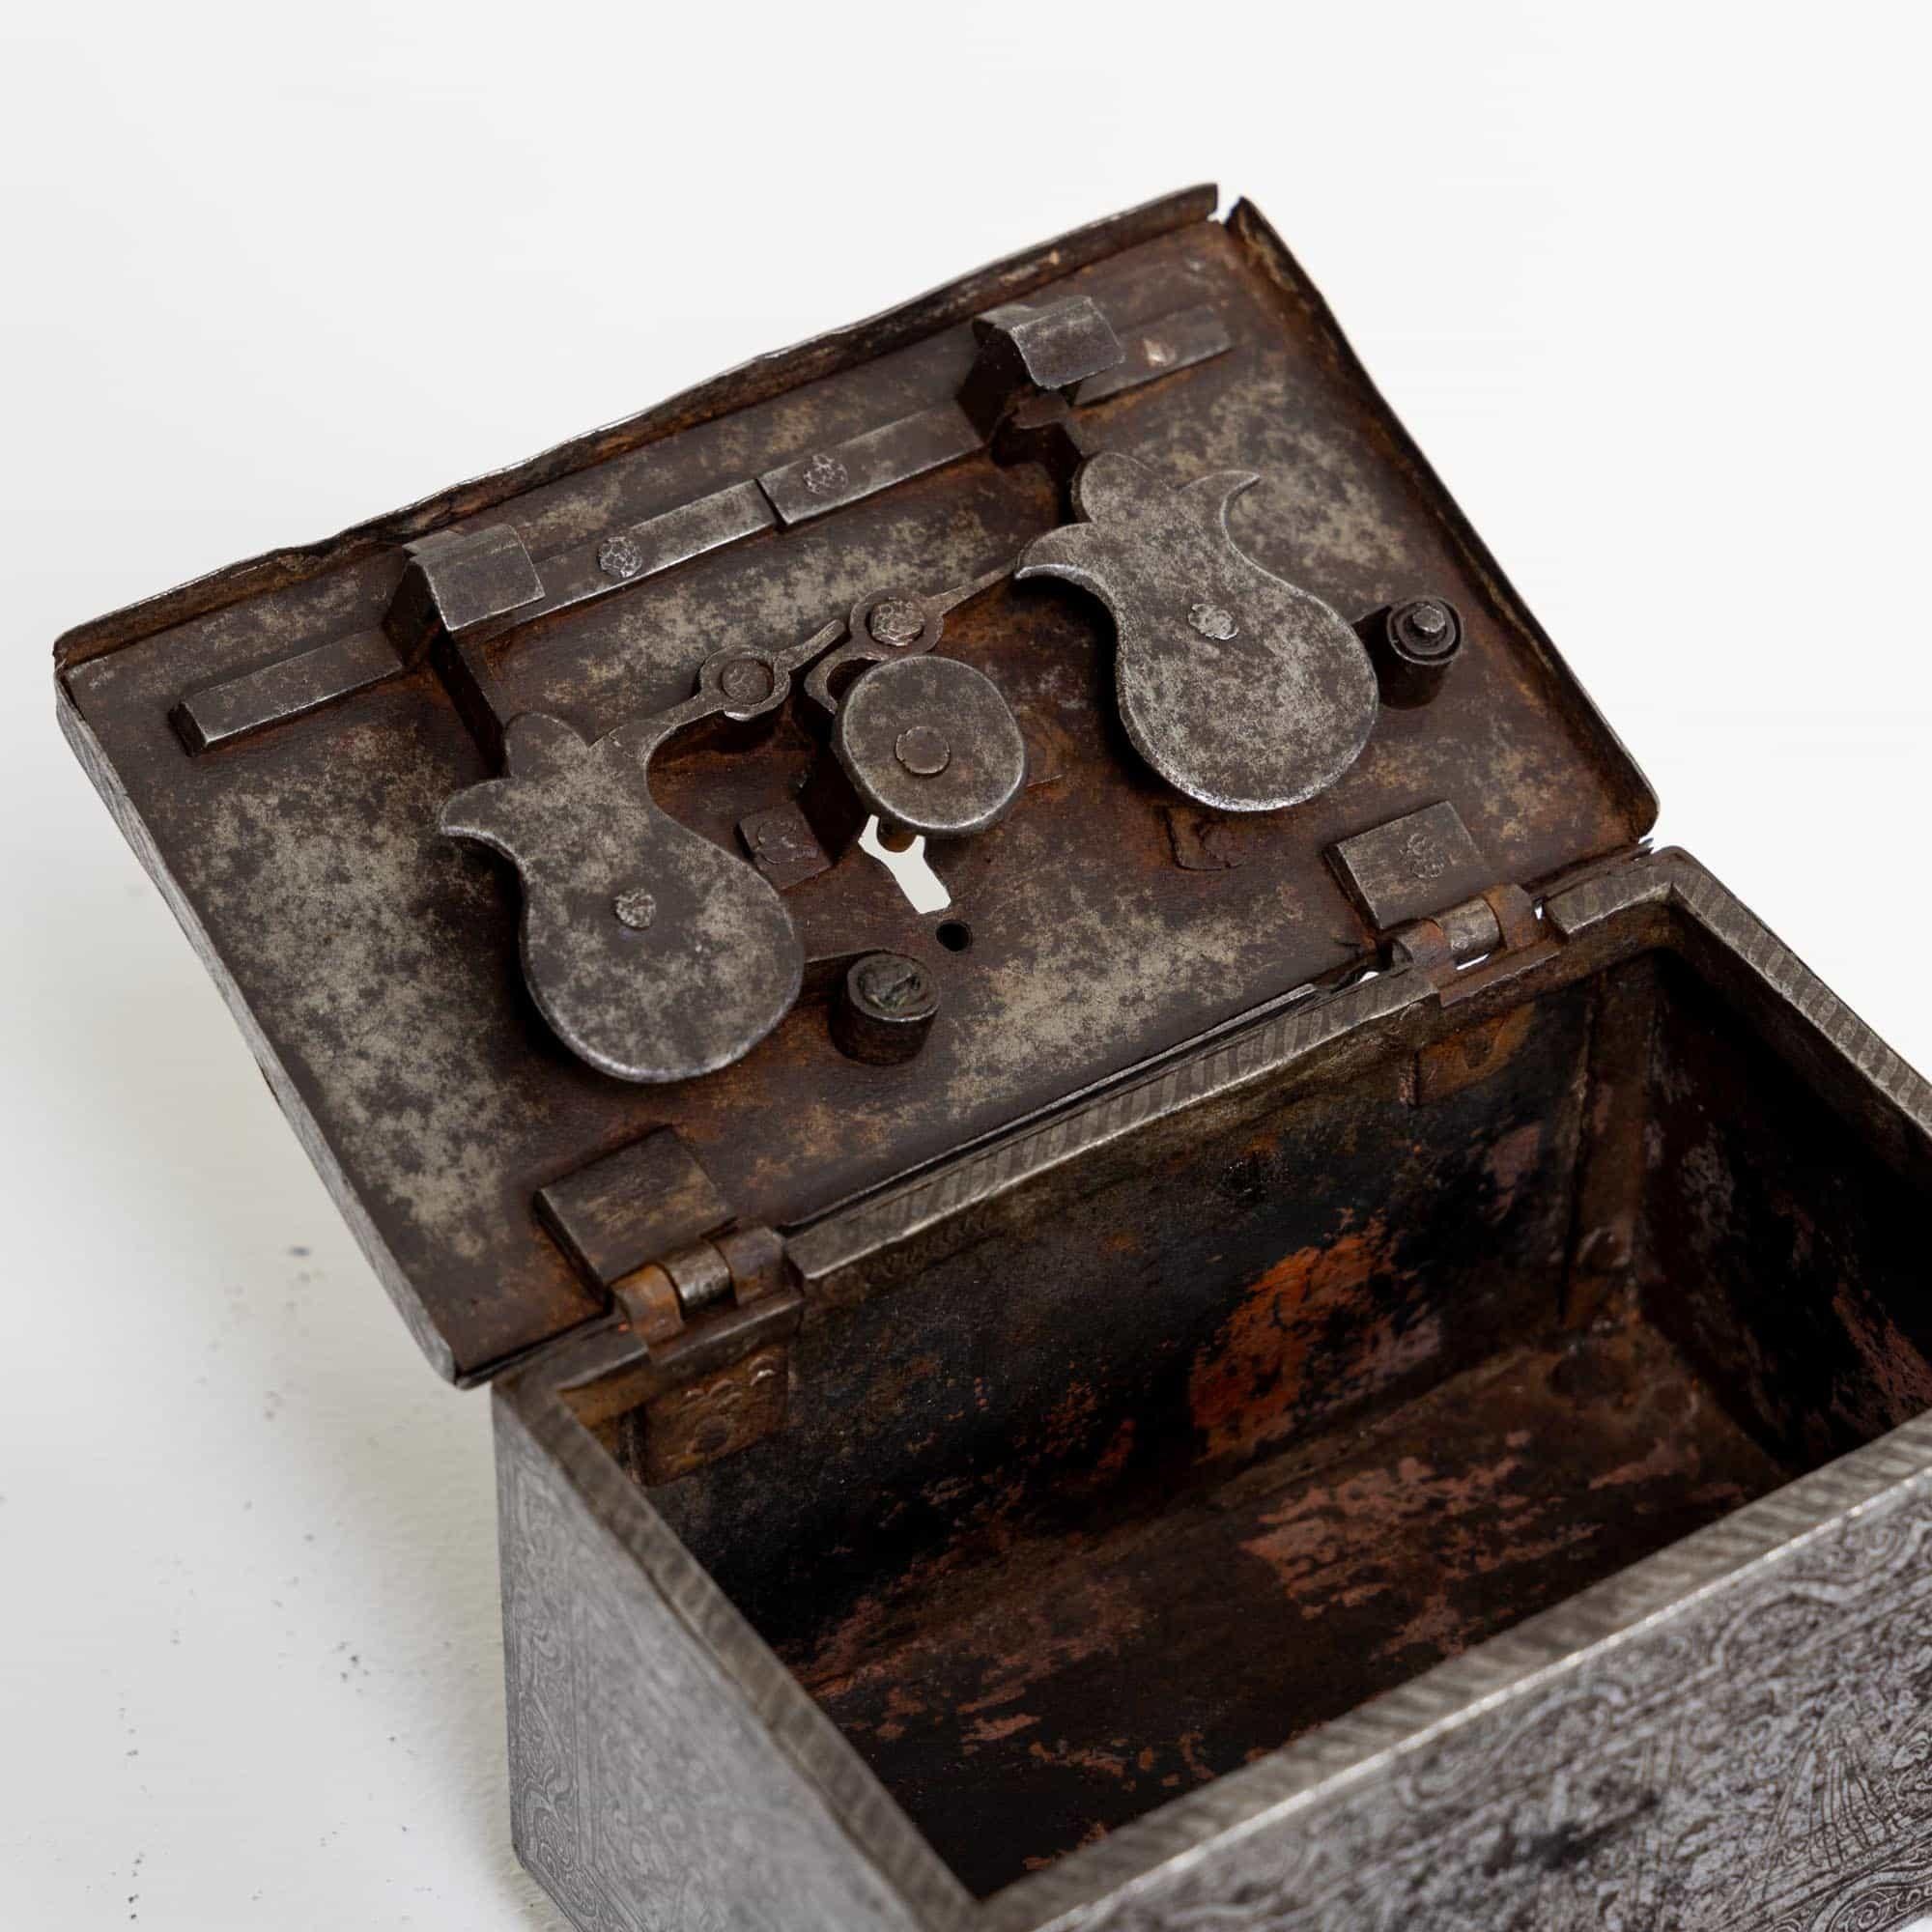 German Iron Cassette with Keys and chased Decor, Nuremberg around 1580